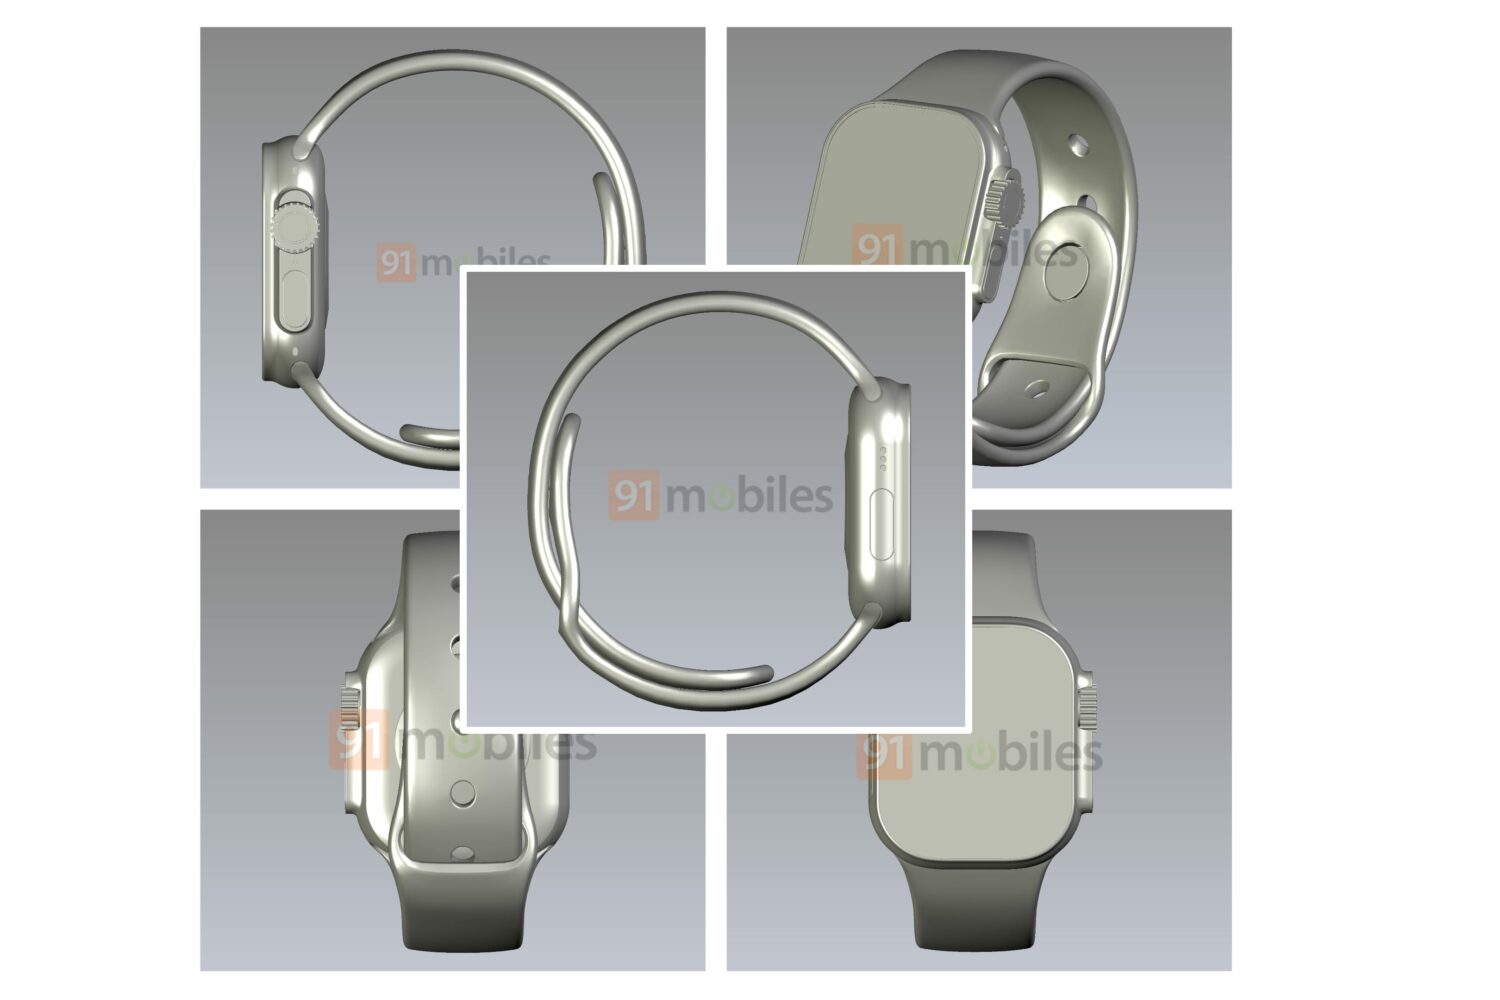 CAD renderings of Apple Watch Pro revealing a lefthand side physical button, a flat screen design and a protrusion on the right housing the Digital Crown and Side buttons